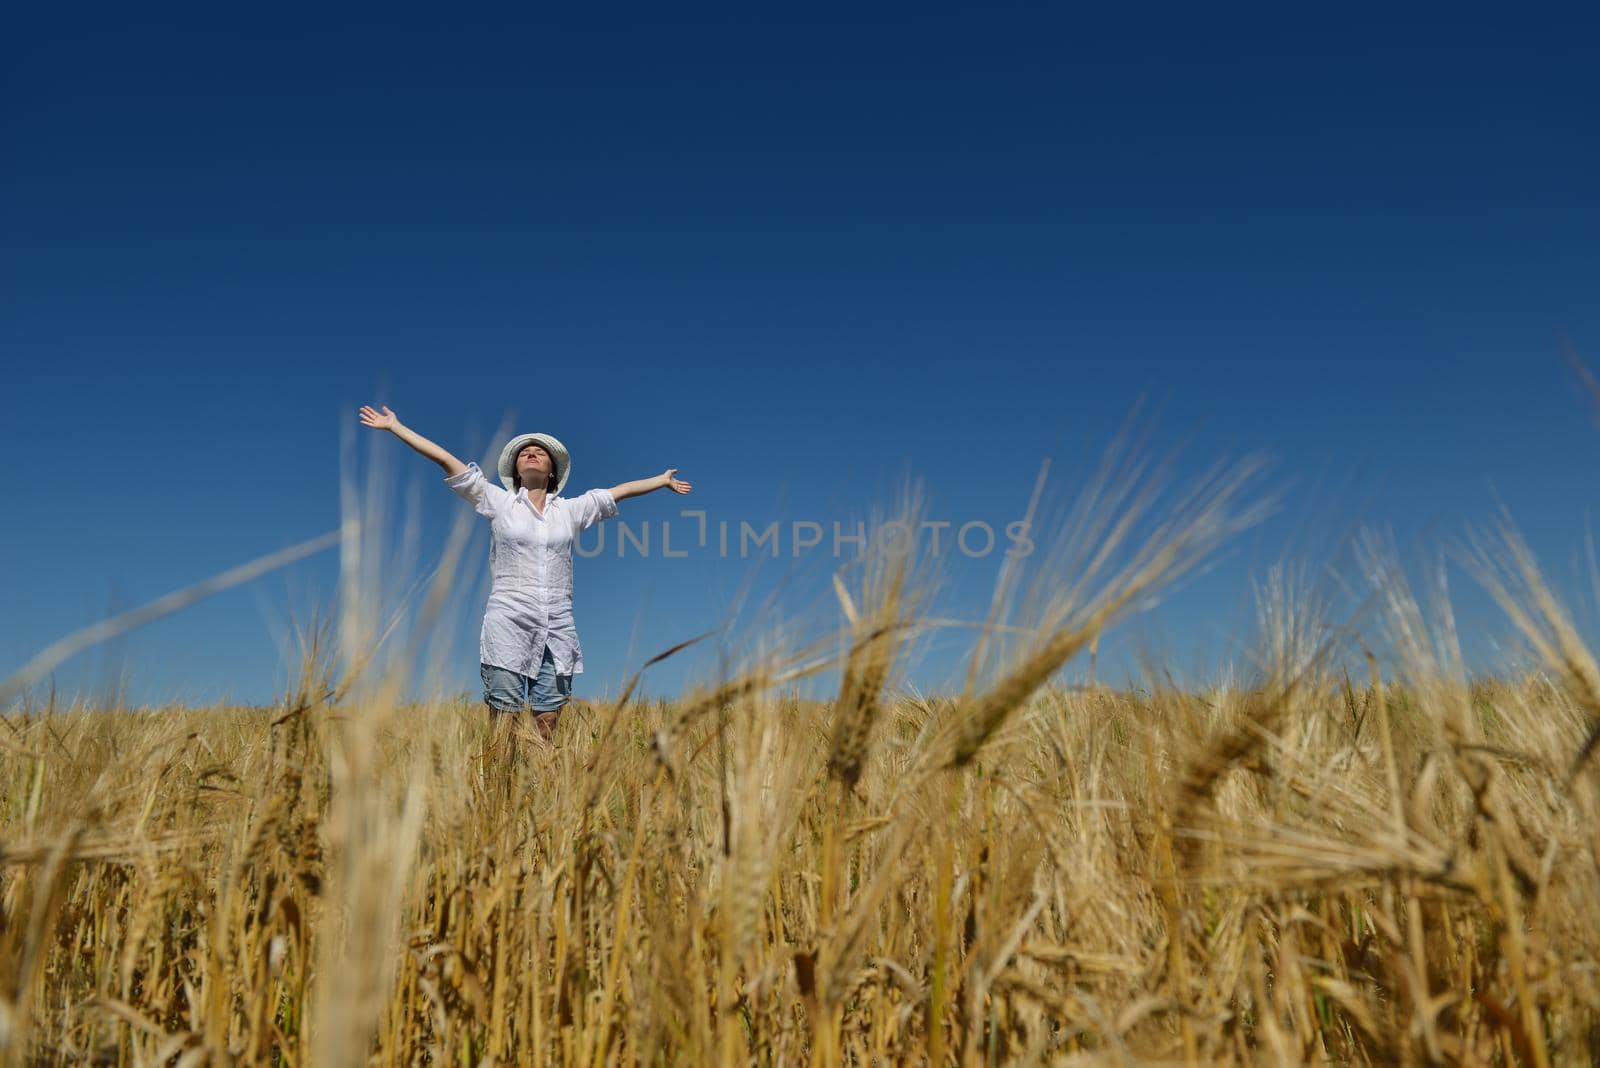 Young woman standing jumping and running  on a wheat field with blue sky the background at summer day representing healthy life and agriculture concept